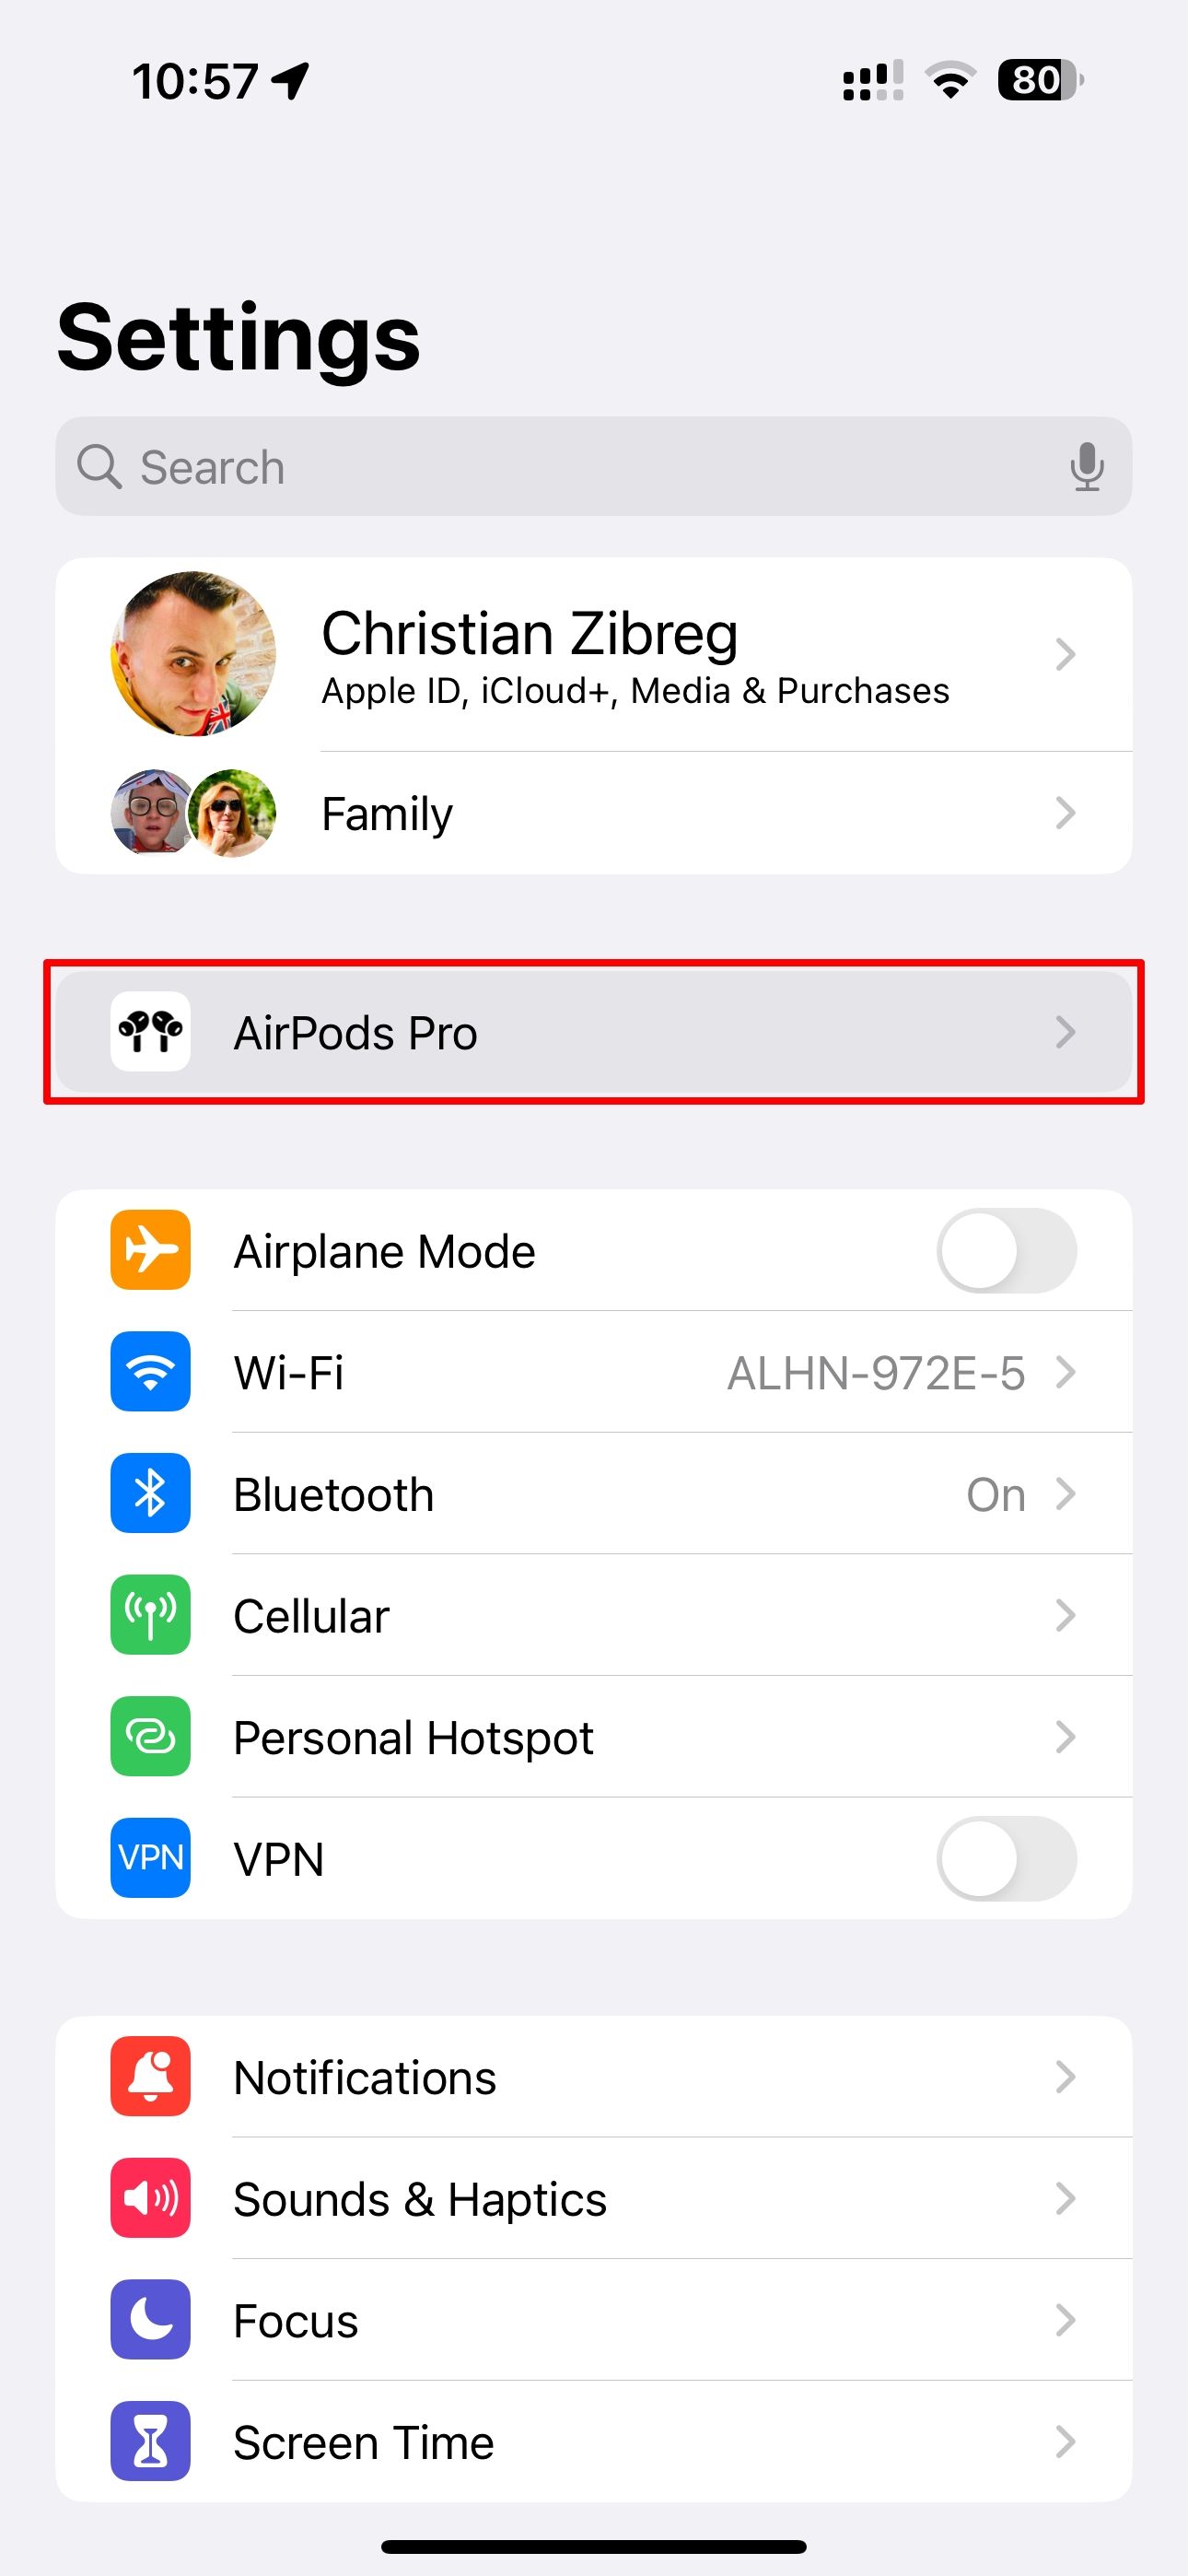 AirPods highlighted in the root menu of the iPhone Settings app